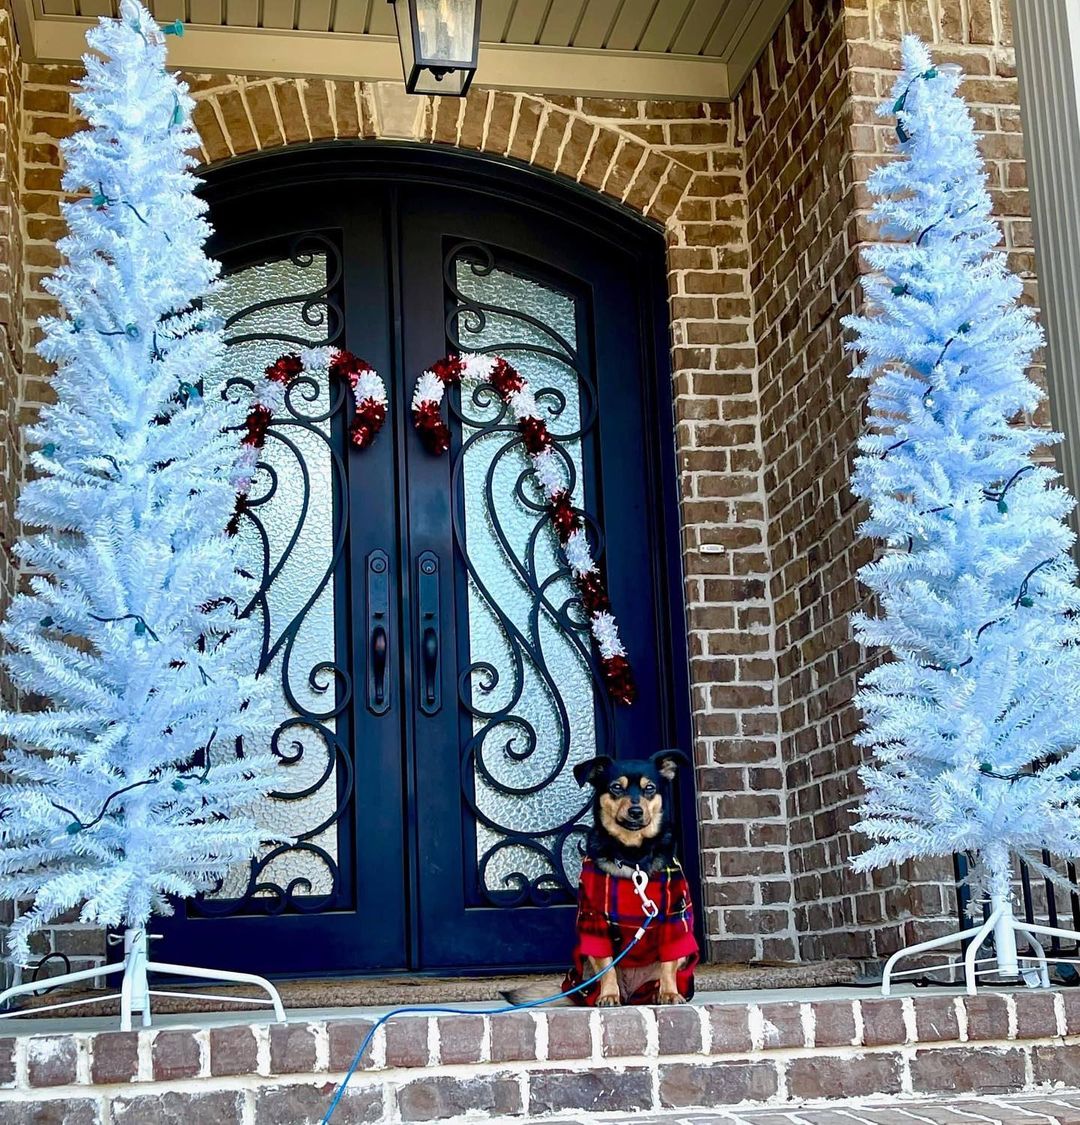 Adoptable Ruby was very helpful with Christmas decorations at her foster home.